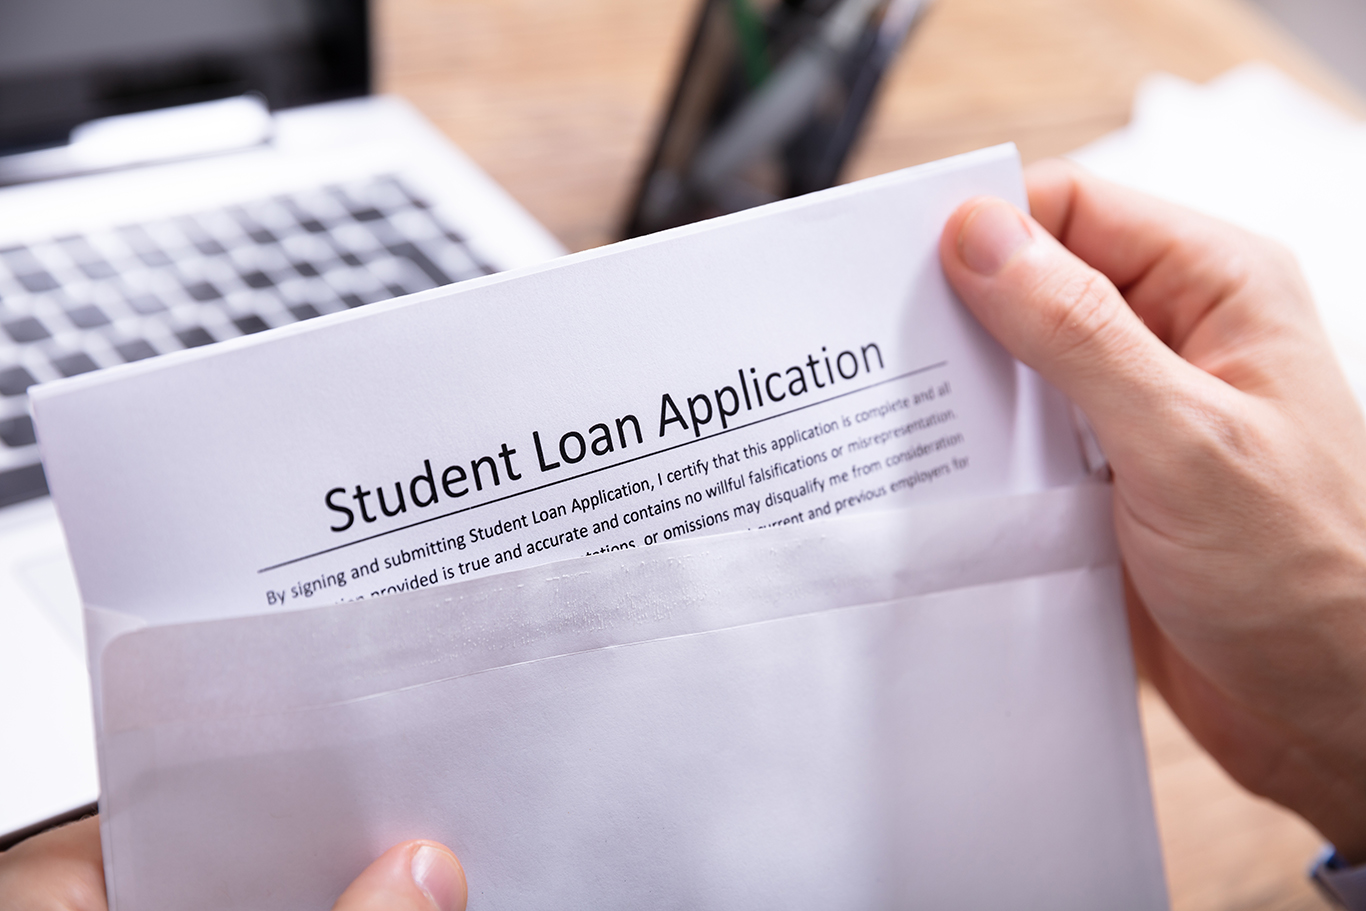 Close-up Of A Person's Hand Removing Student Loan Application Form From White Envelope;